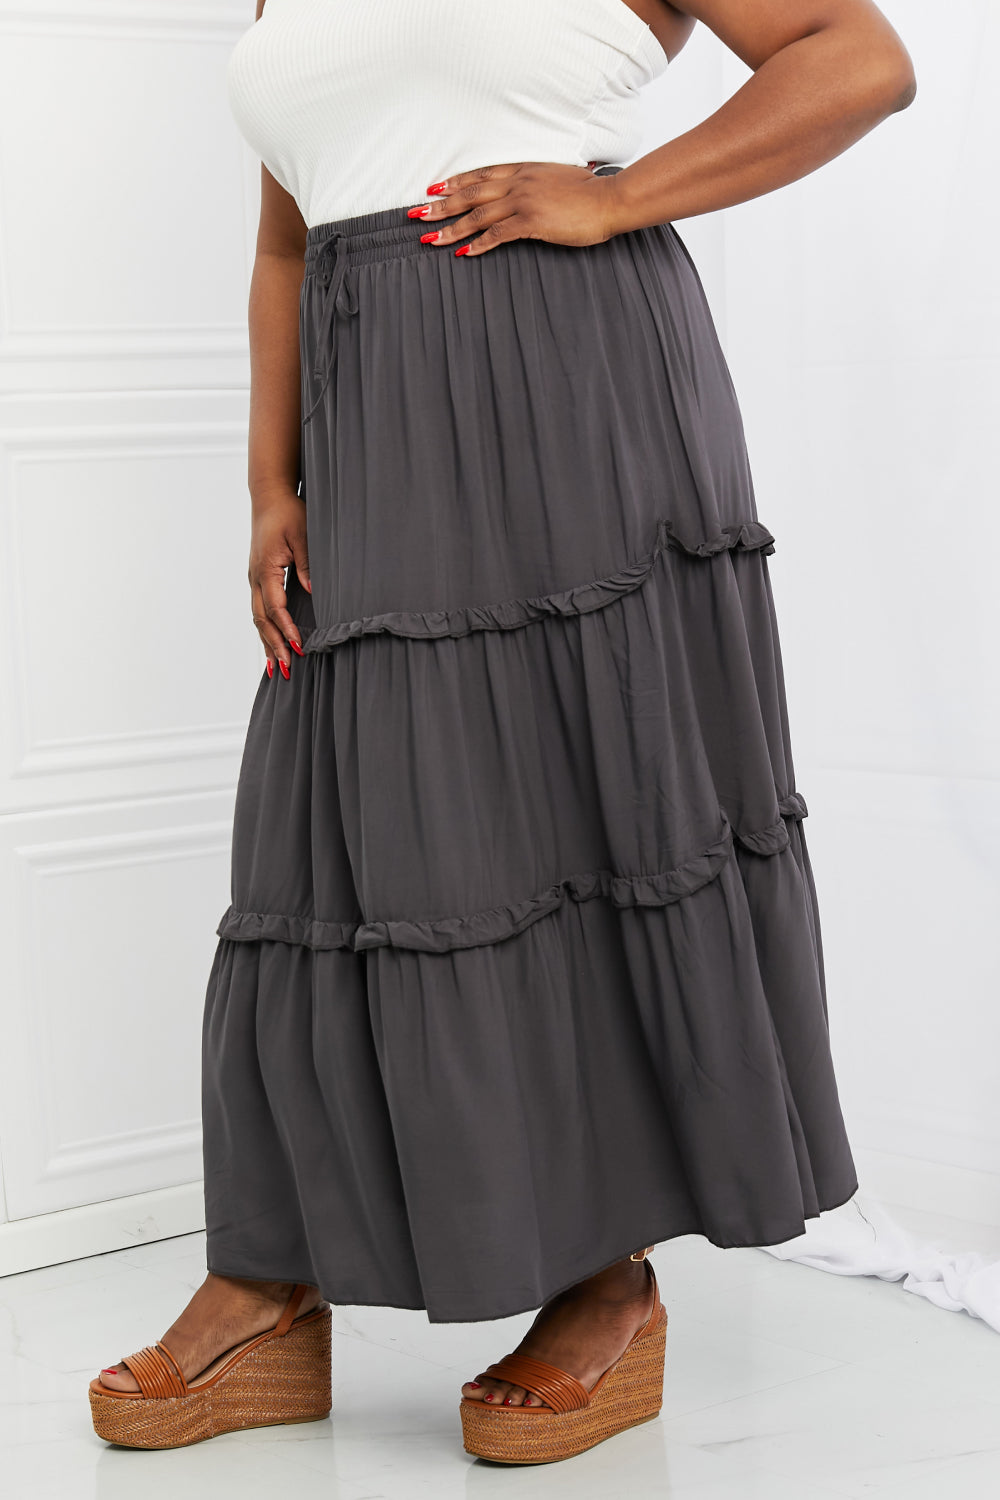 Zenana Summer Days Full Size Ruffled Maxi Skirt in Ash Grey - Coco and lulu boutique 